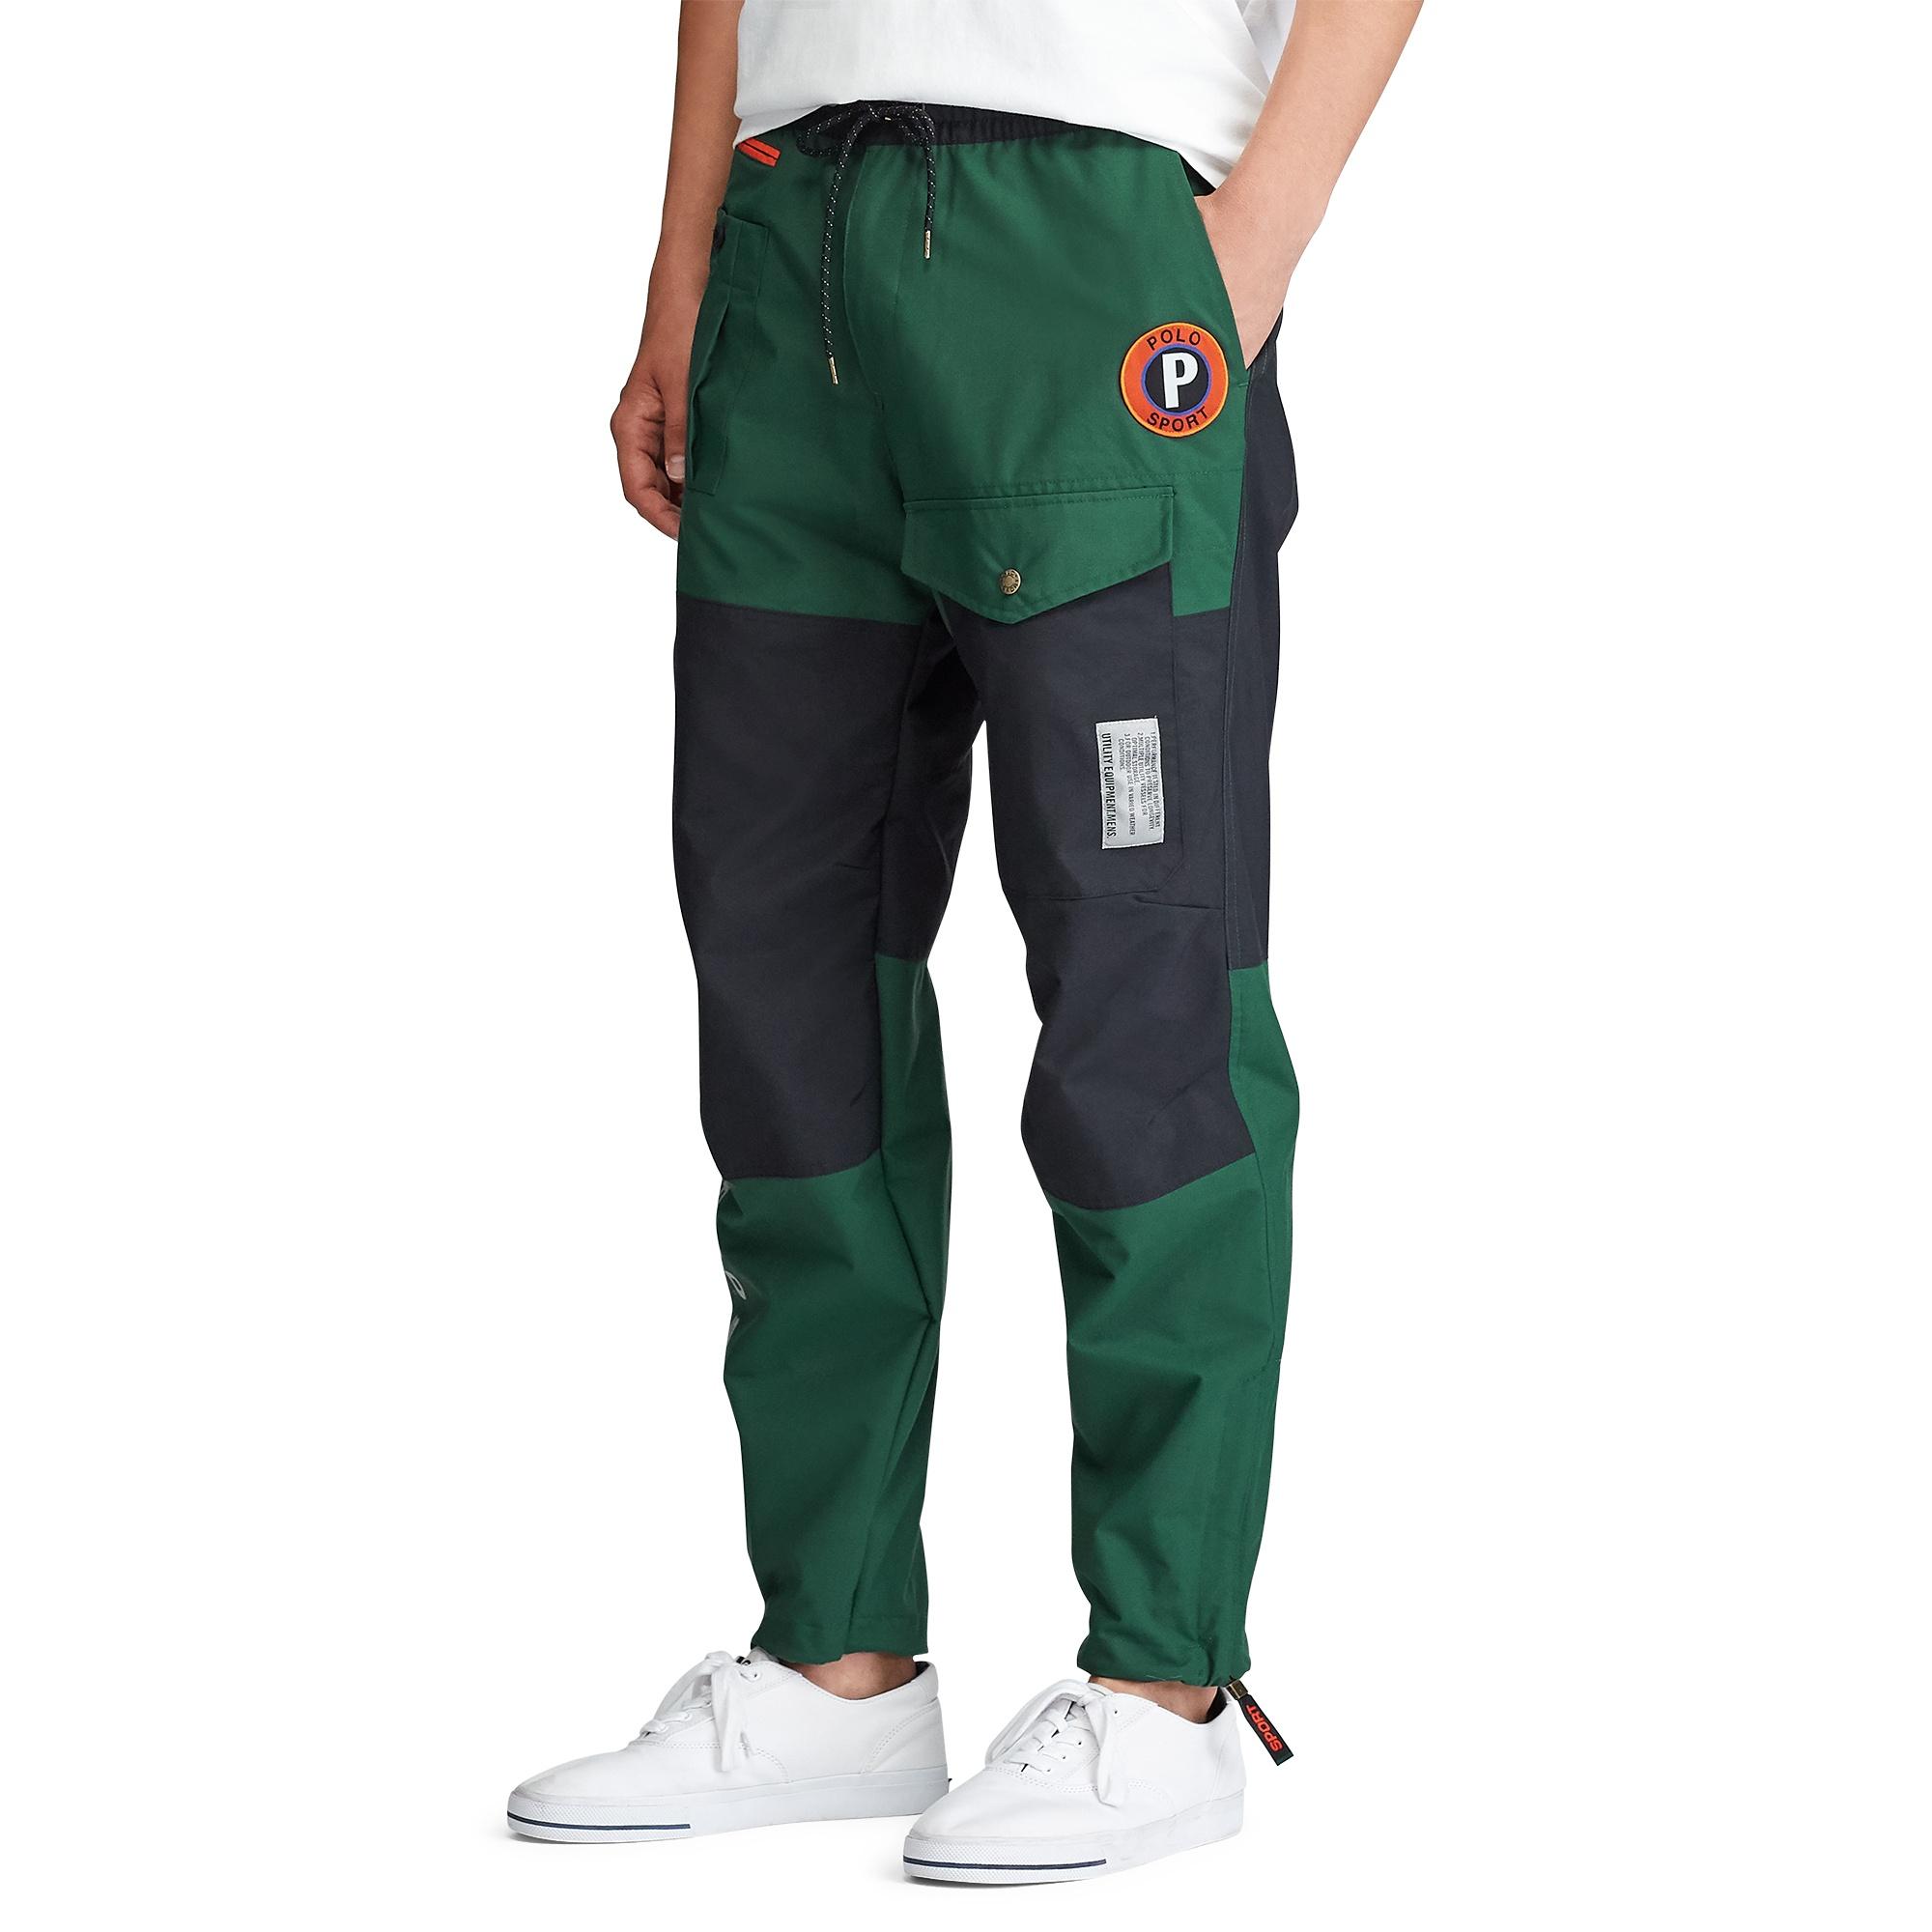 Polo Ralph Lauren Polo Sport Utility Pant in Green for Men